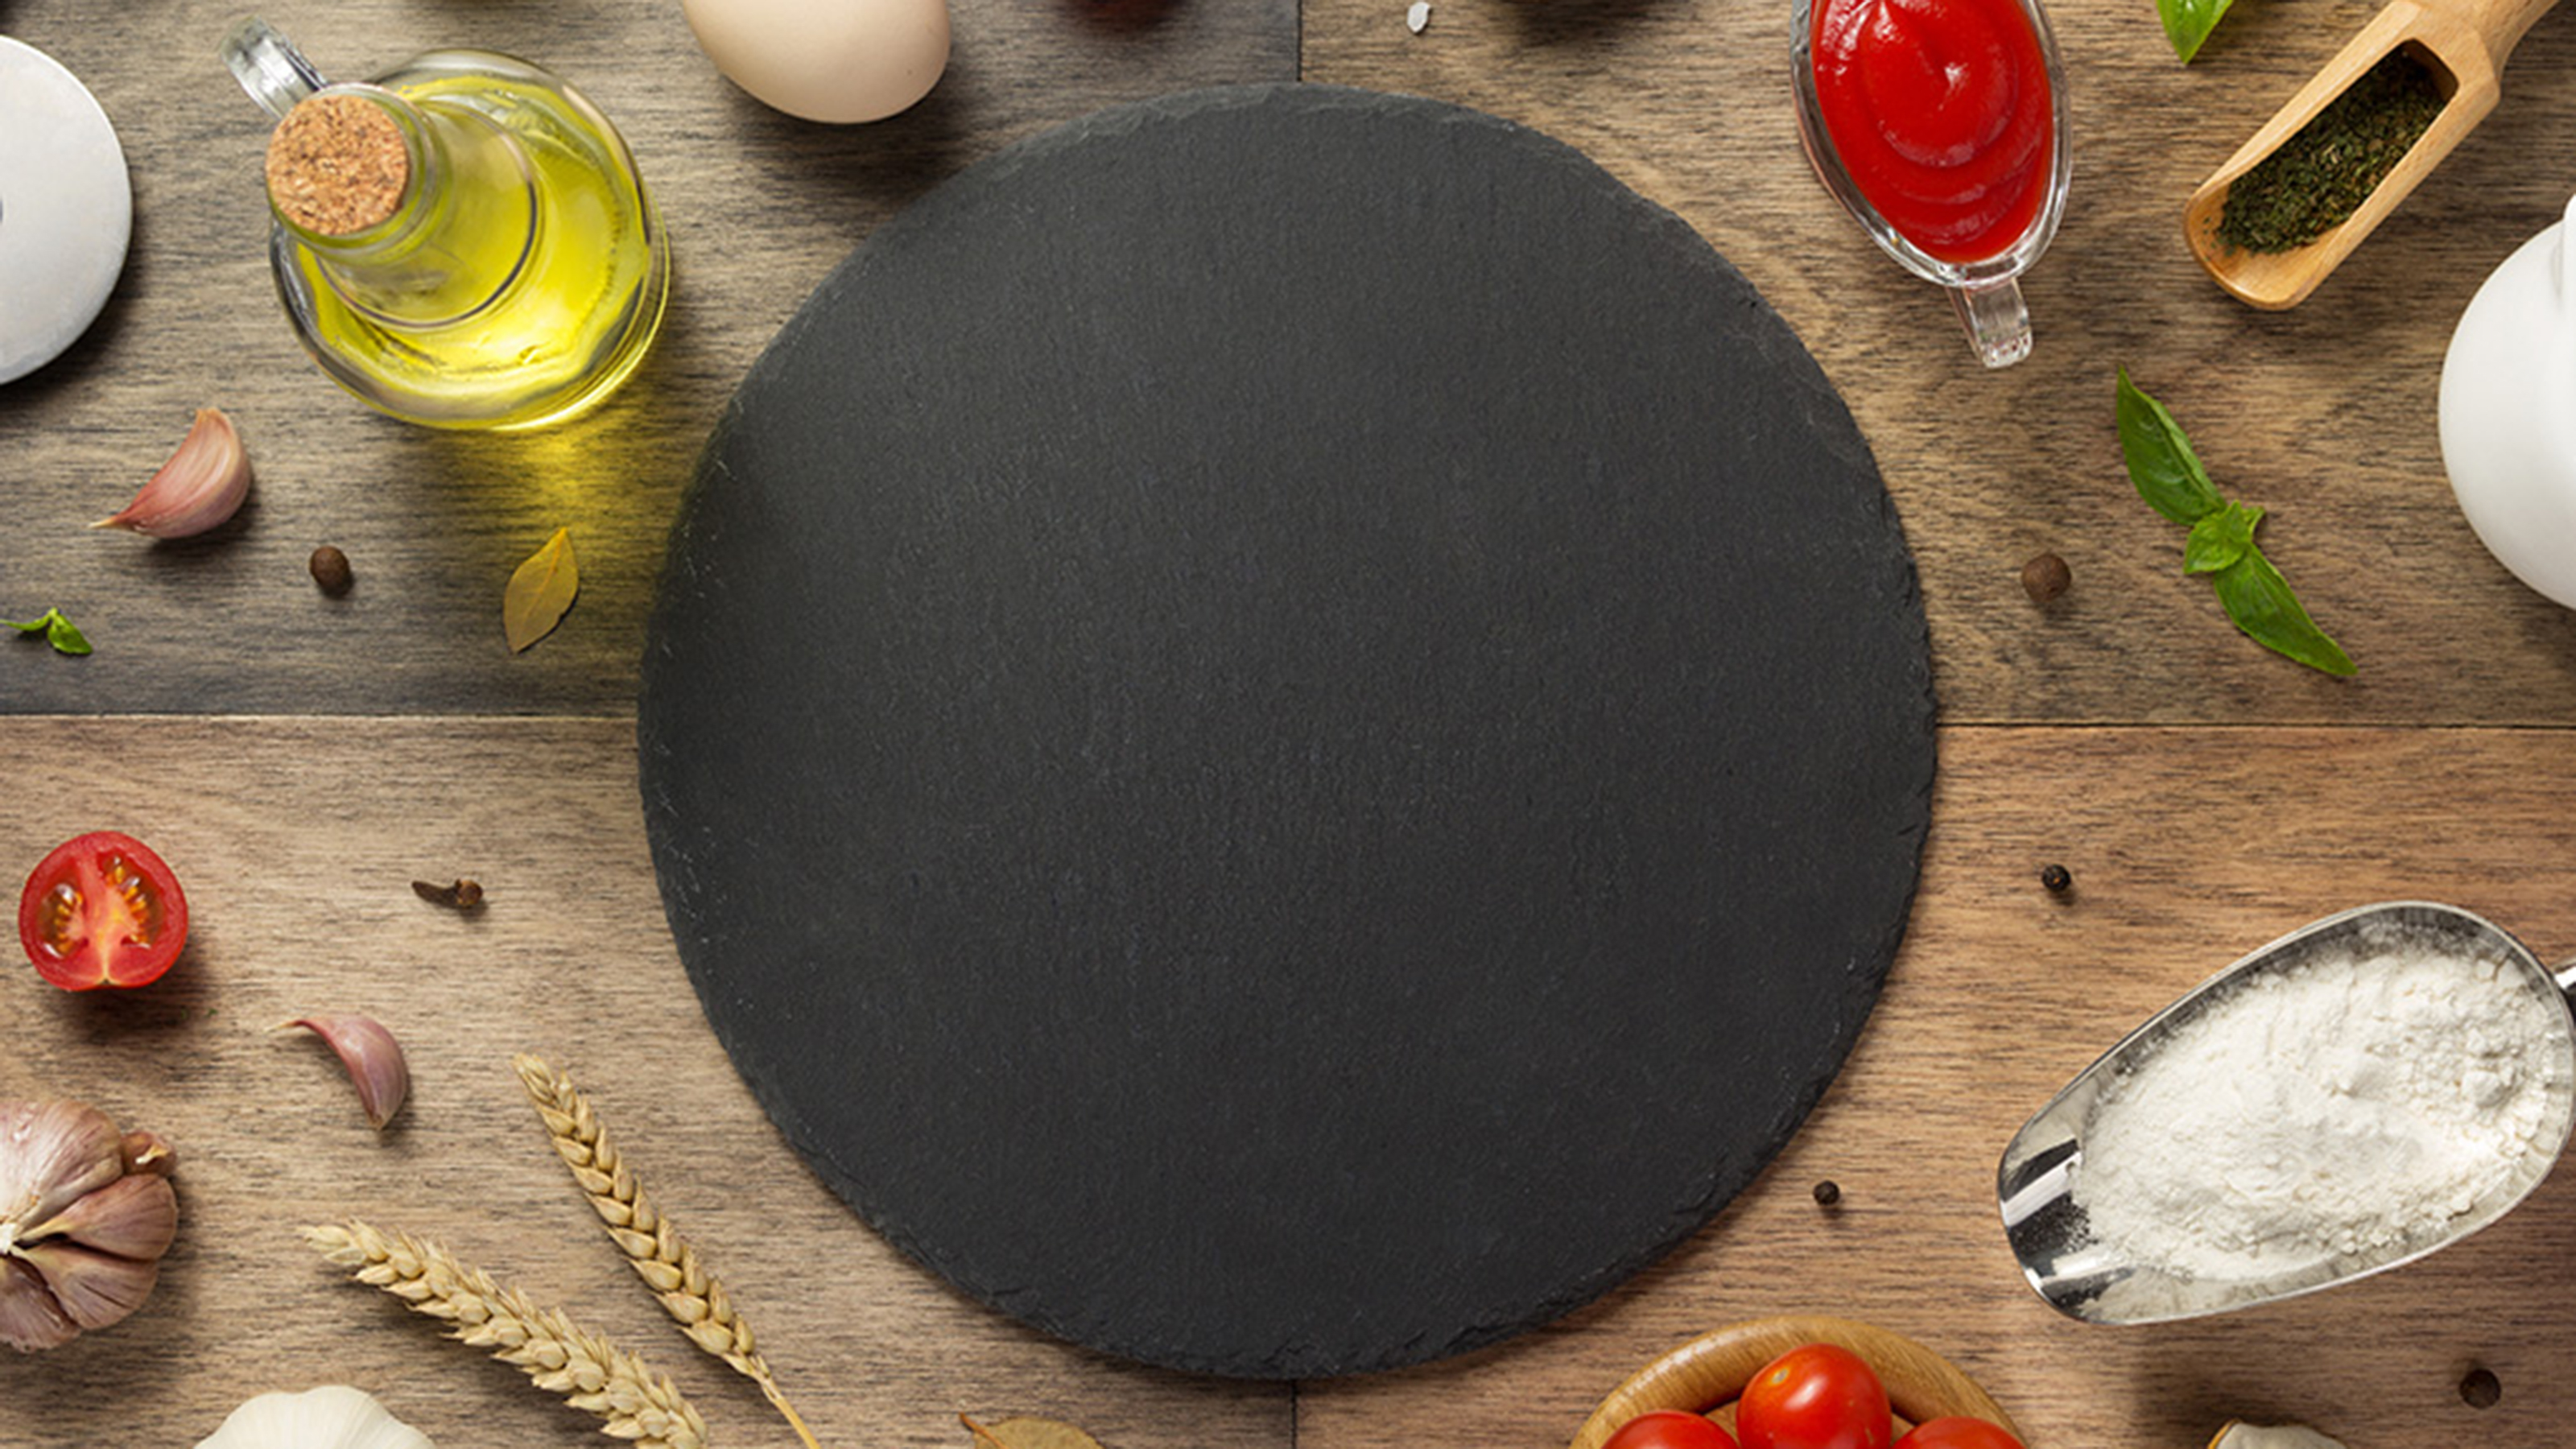 How to Clean a Pizza Stone in 5 Easy Steps